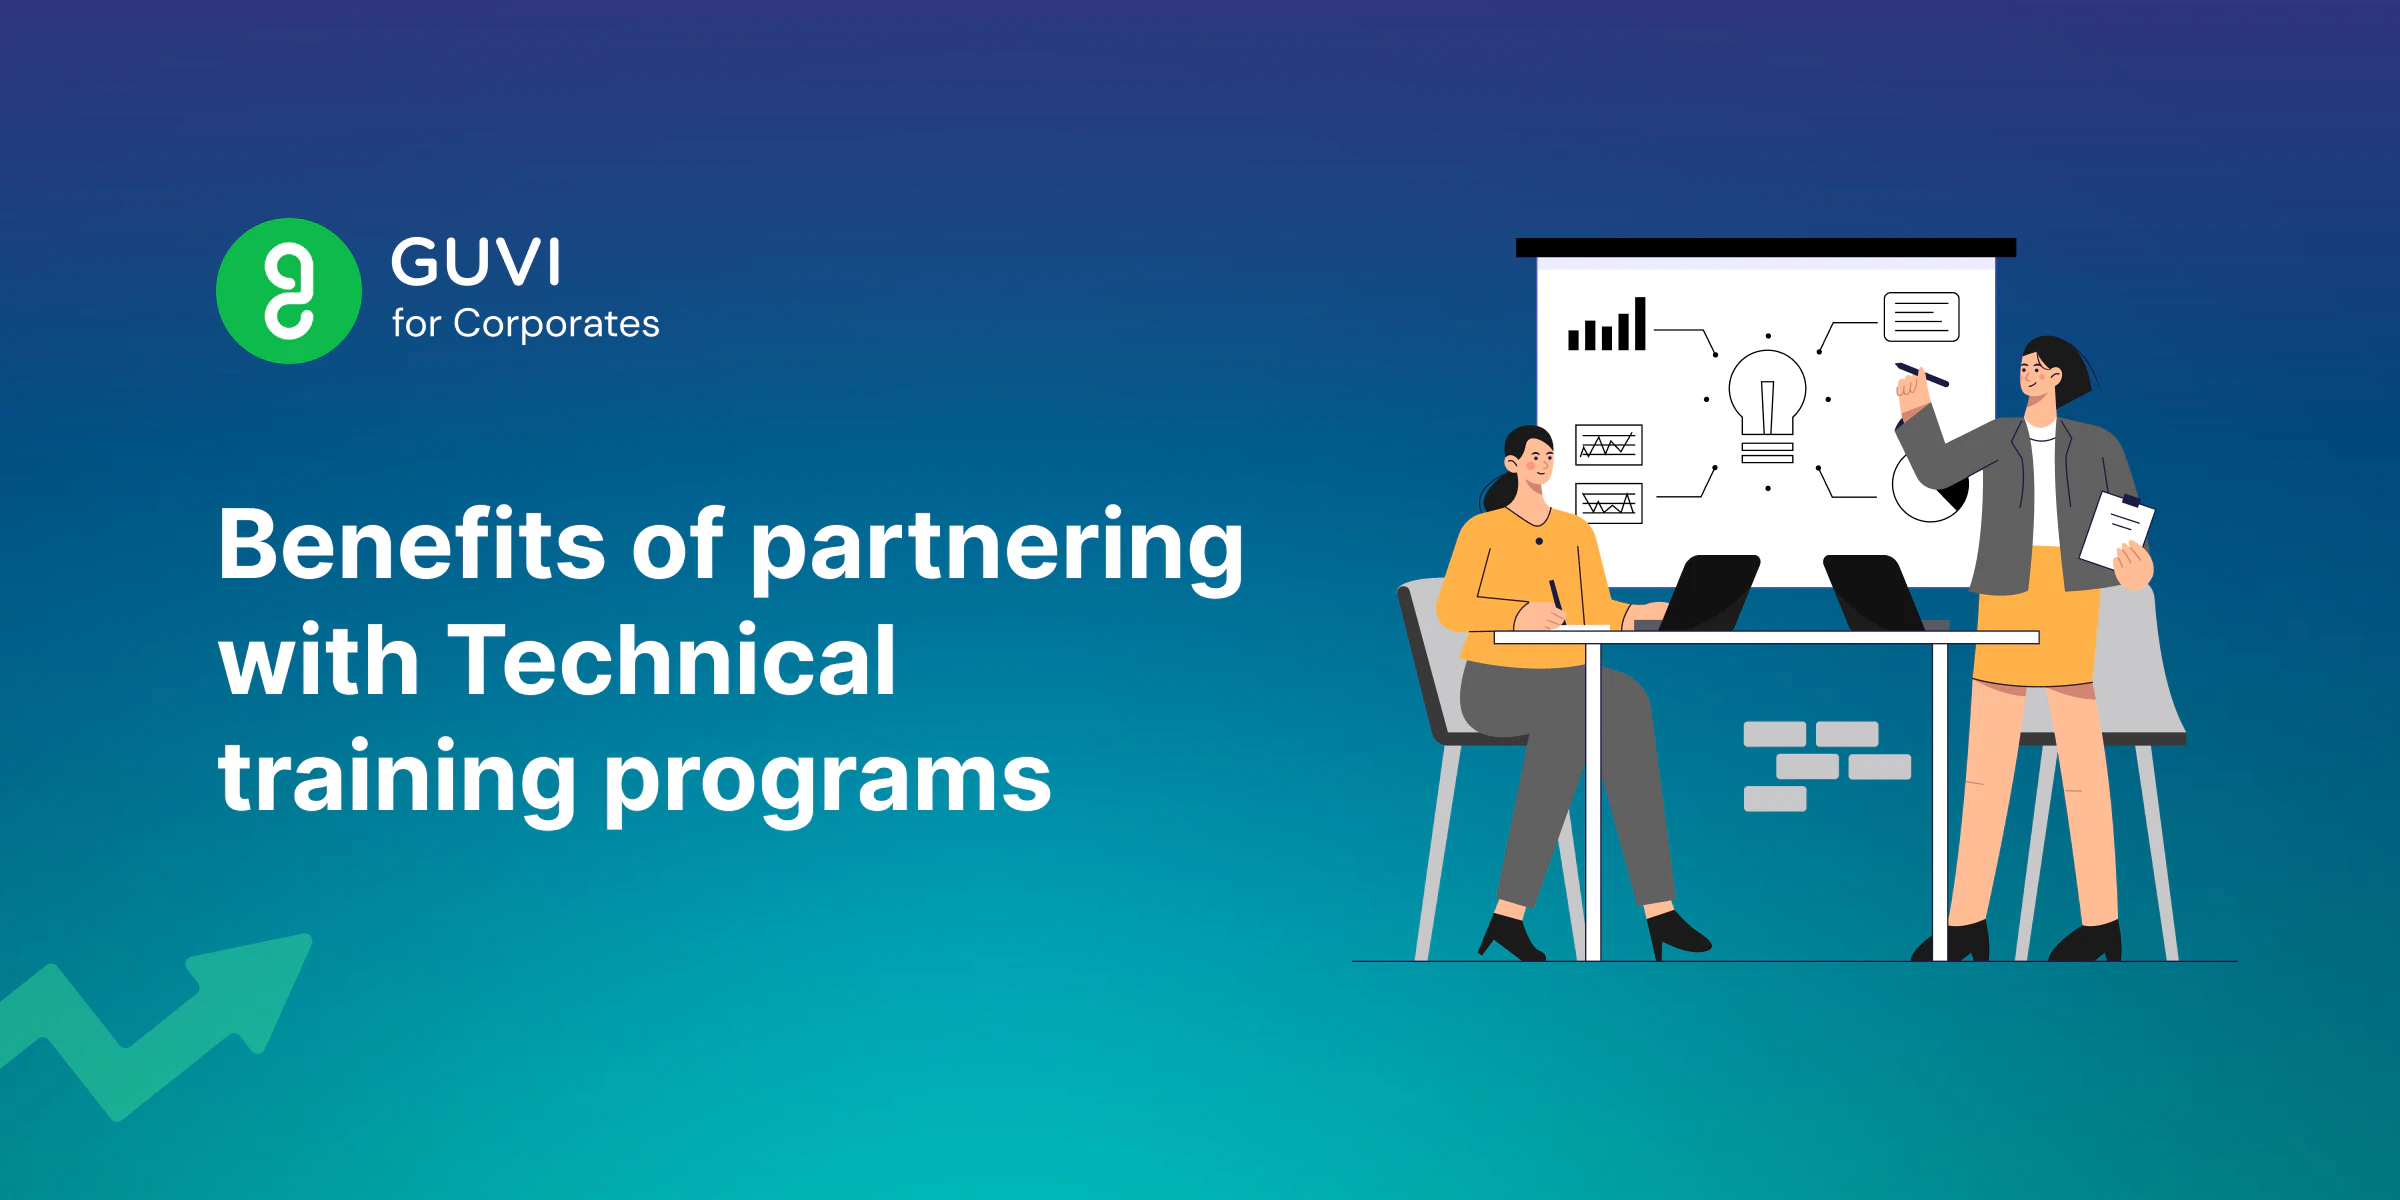 Benefits of Partnering with Technical Training Programs